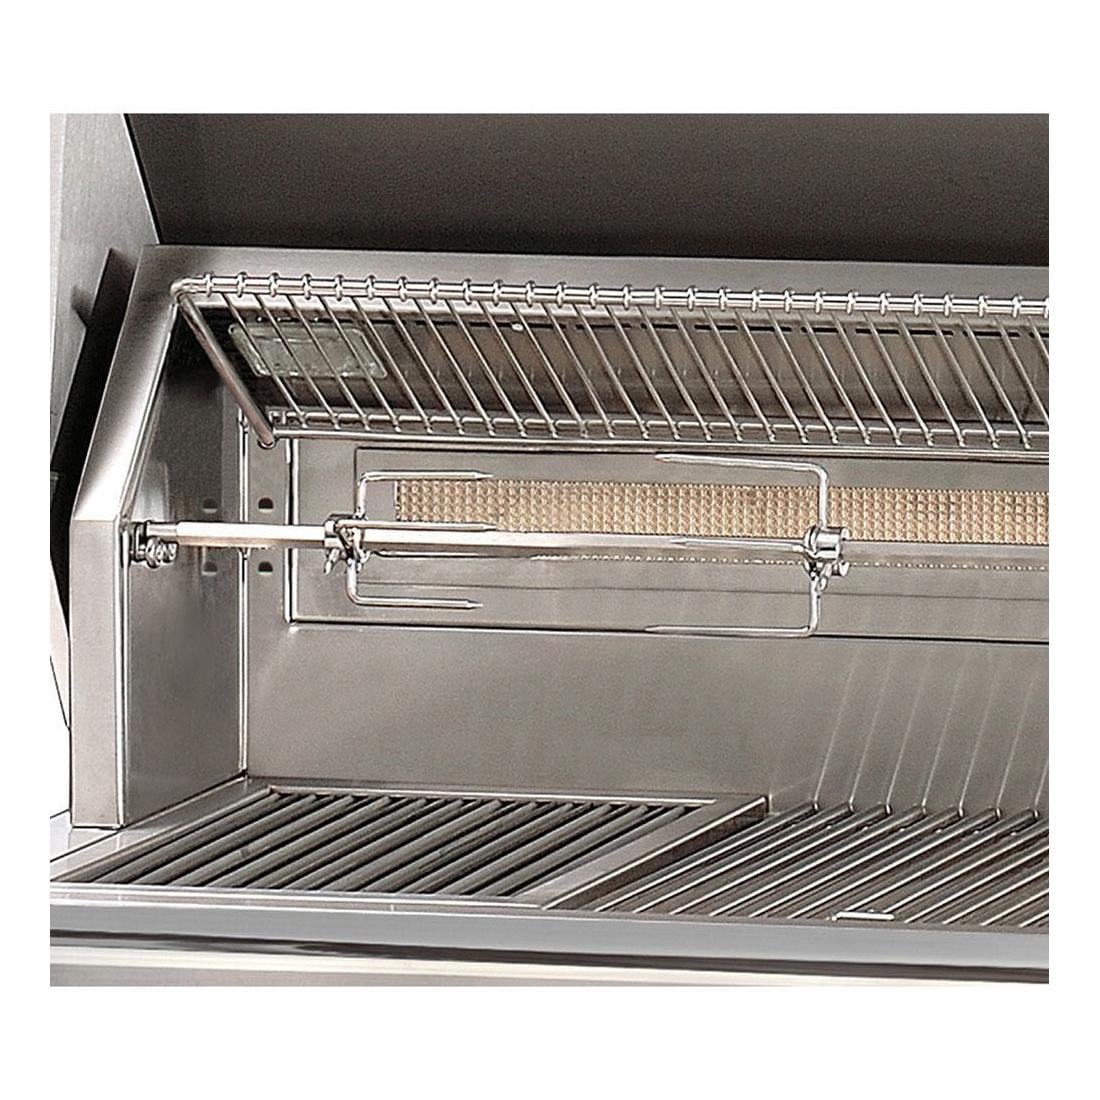 Alfresco ALXE 56-Inch Built-In Natural Gas All Grill With Sear Zone And Rotisserie in Signal White Matte